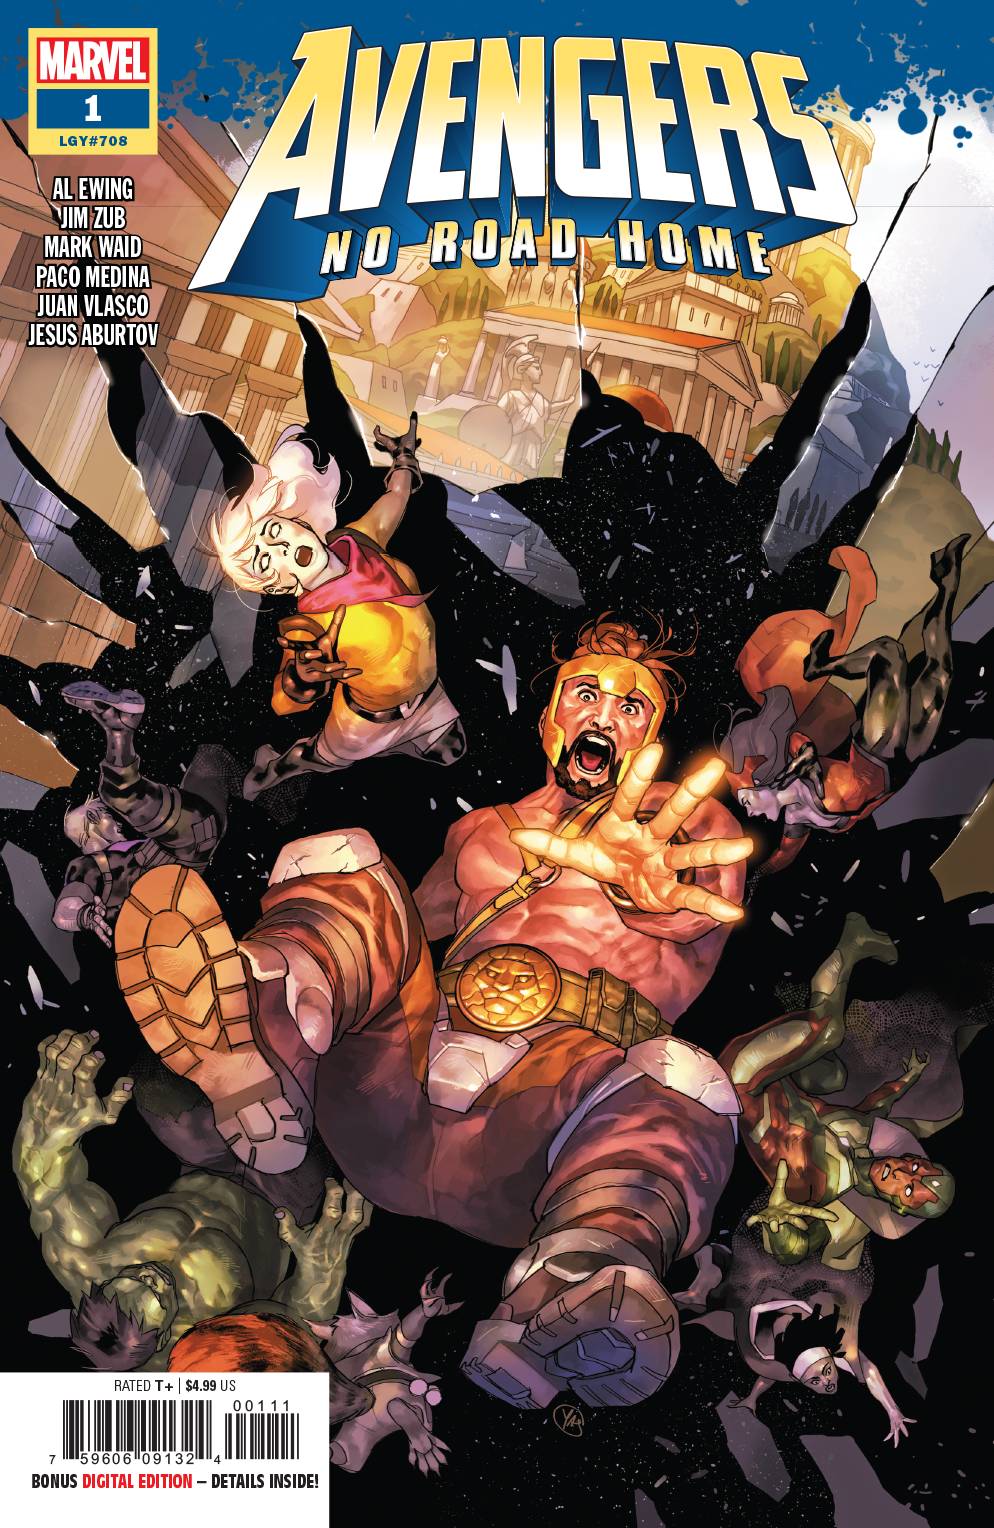 AVENGERS NO ROAD HOME #1 (OF 10) 2019